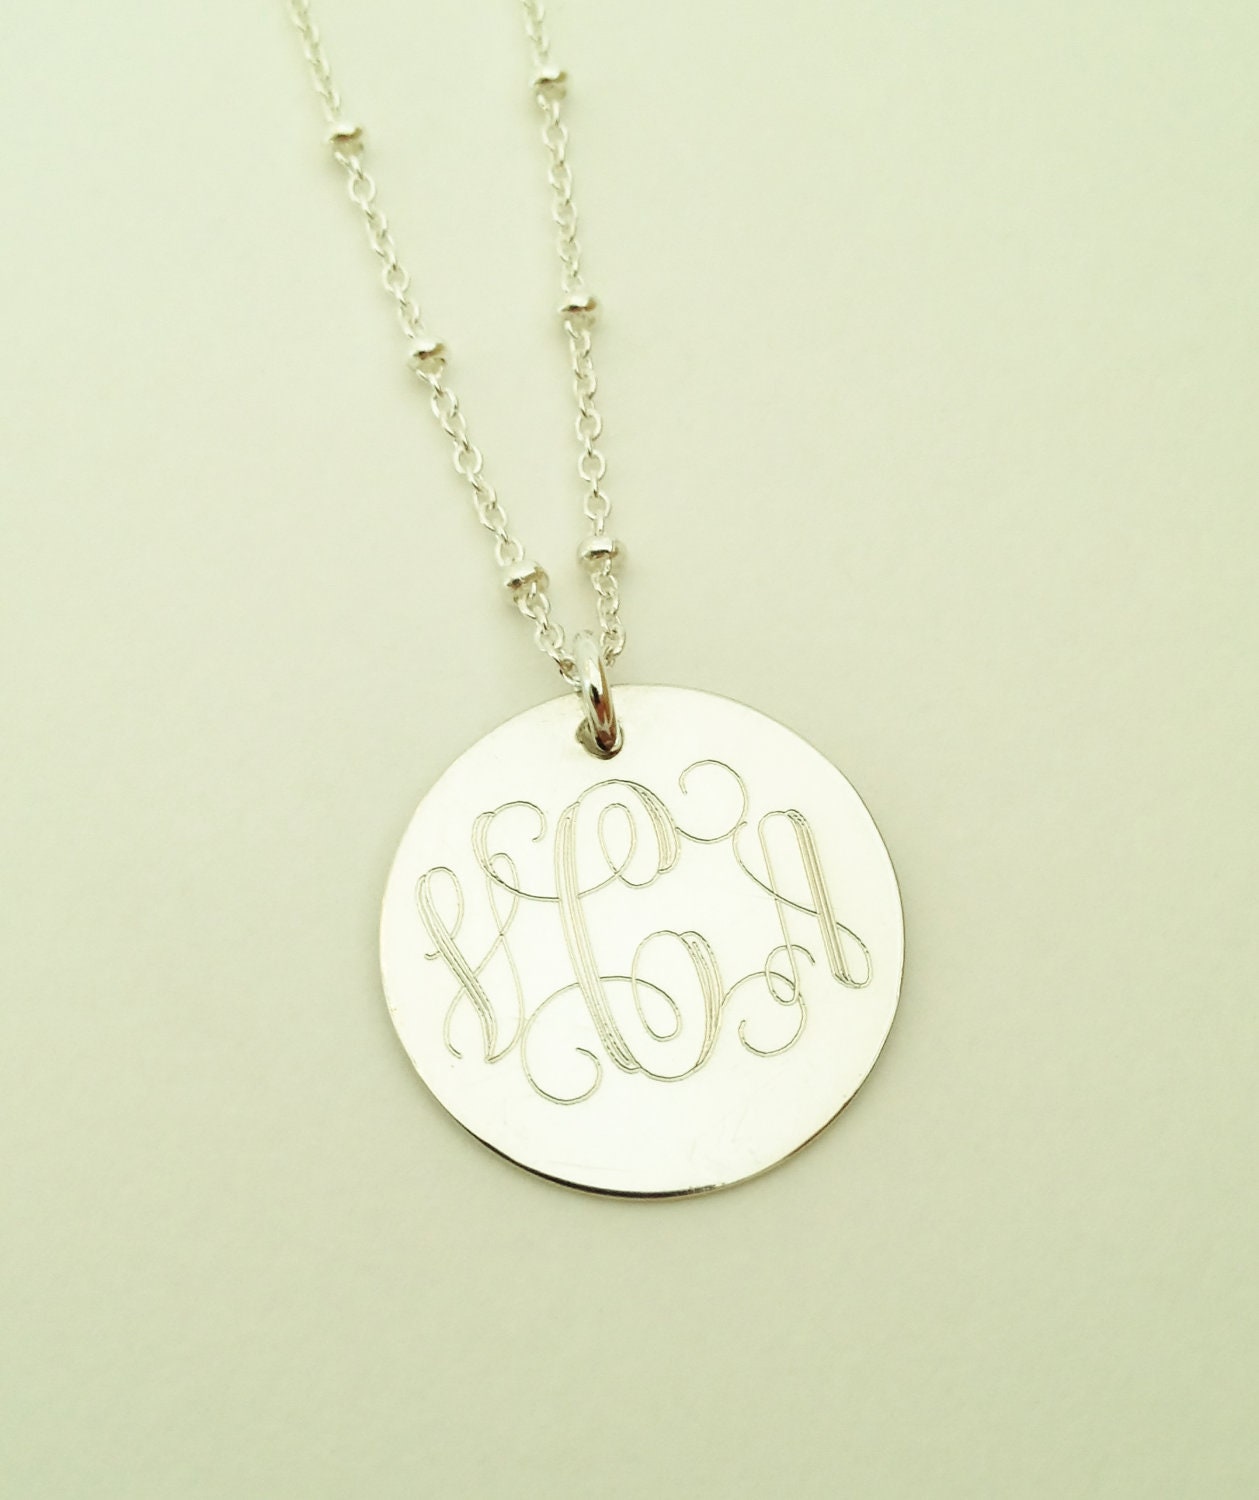  Monogram Necklace – Personalized Monogrammed Jewelry, Sterling  Silver, Bridesmaids Gift, Initials Pendant : Handmade Products